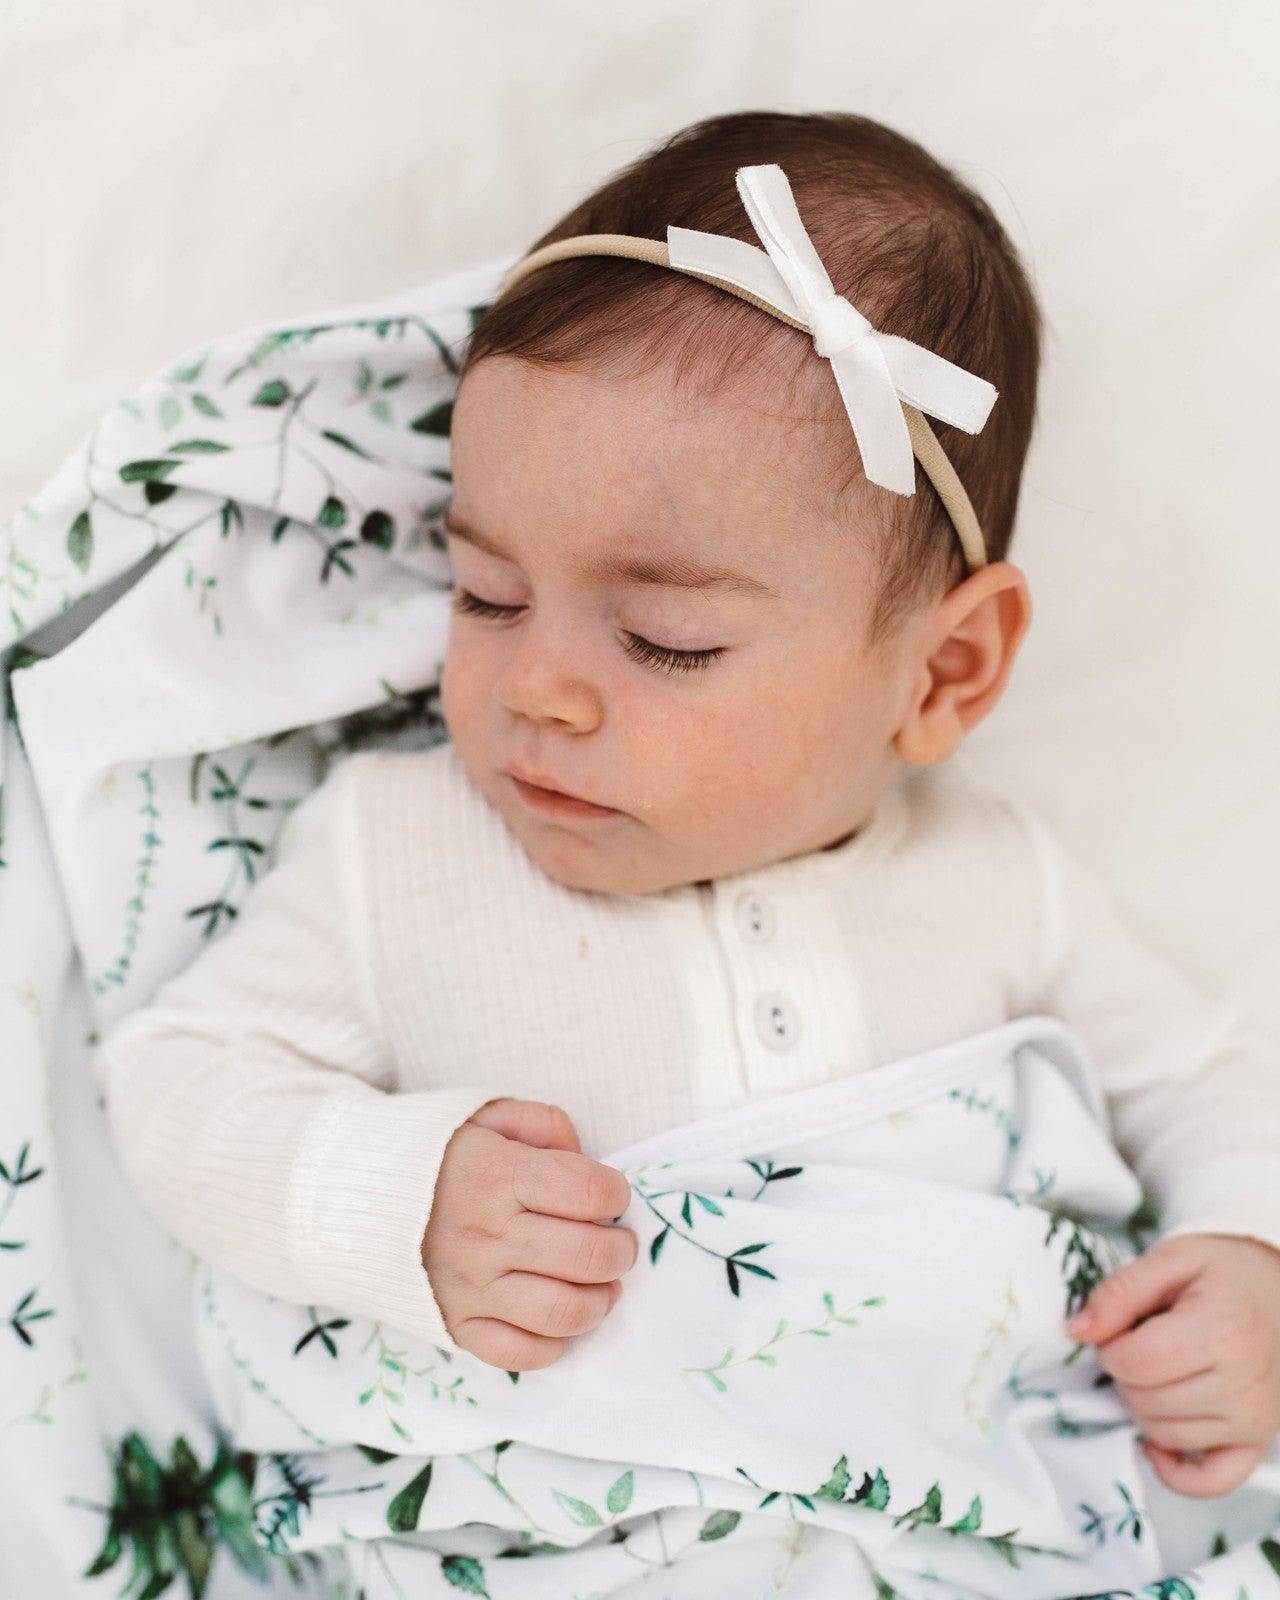 Snuggle Hunny Lullaby White Velvet Baby Headband and Bow - baby hair bands - Snuggle Hunny Kids